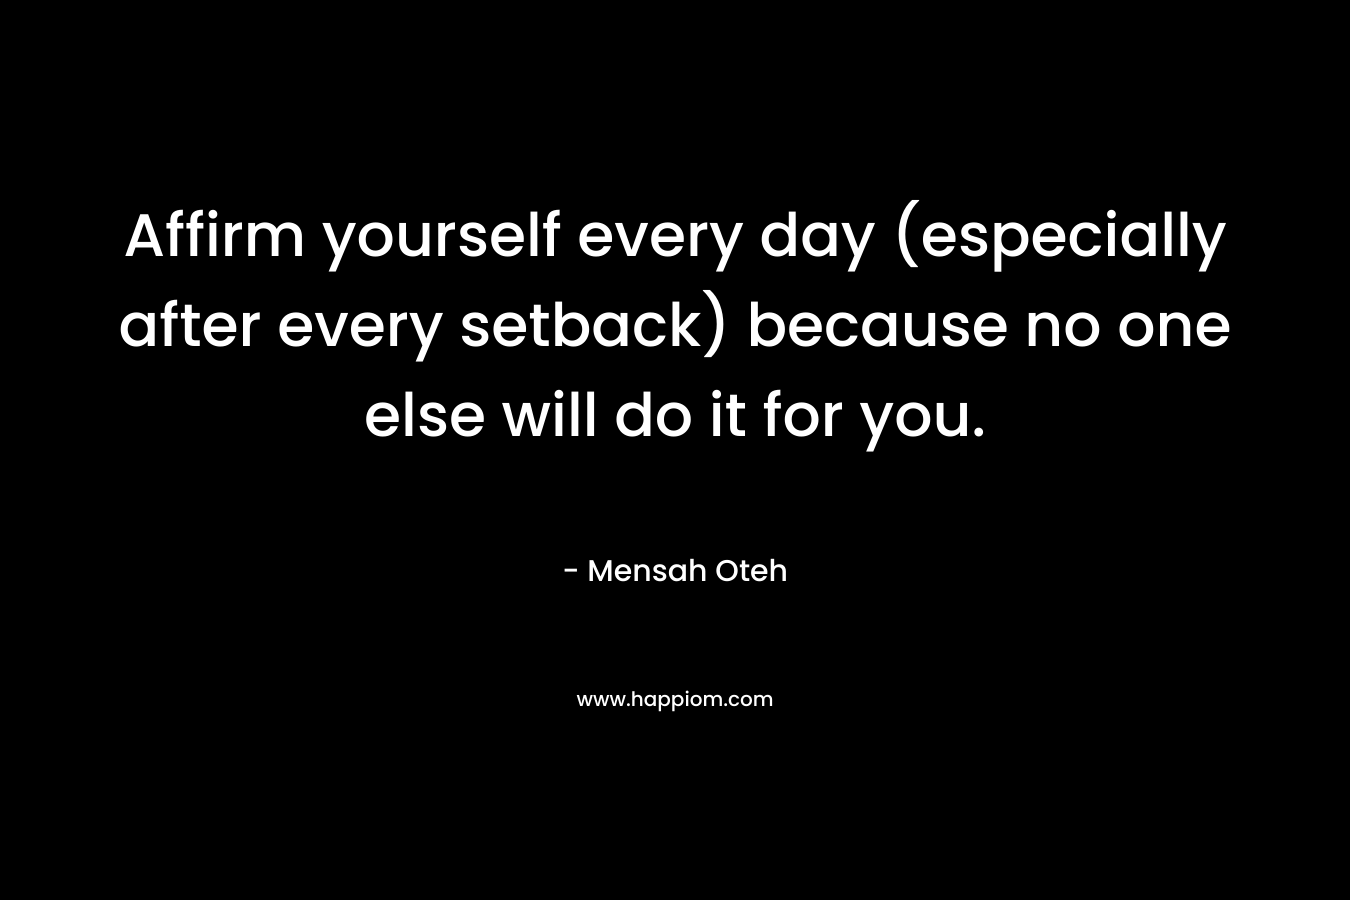 Affirm yourself every day (especially after every setback) because no one else will do it for you.